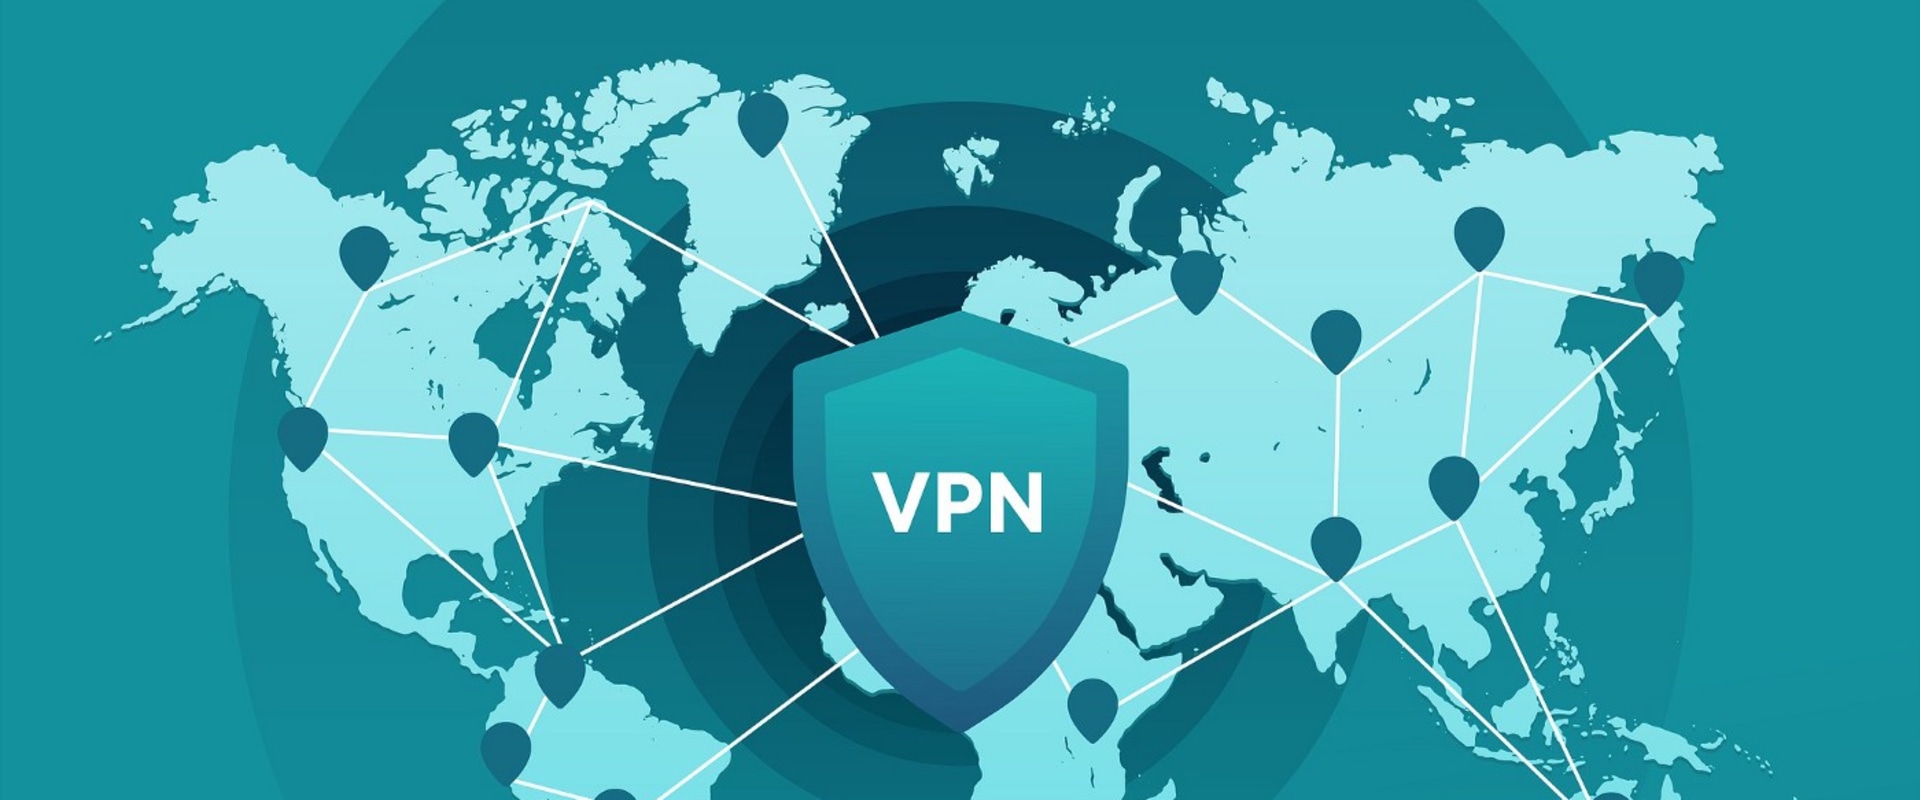 Best VPNs with DNS Leak Protection Capabilities